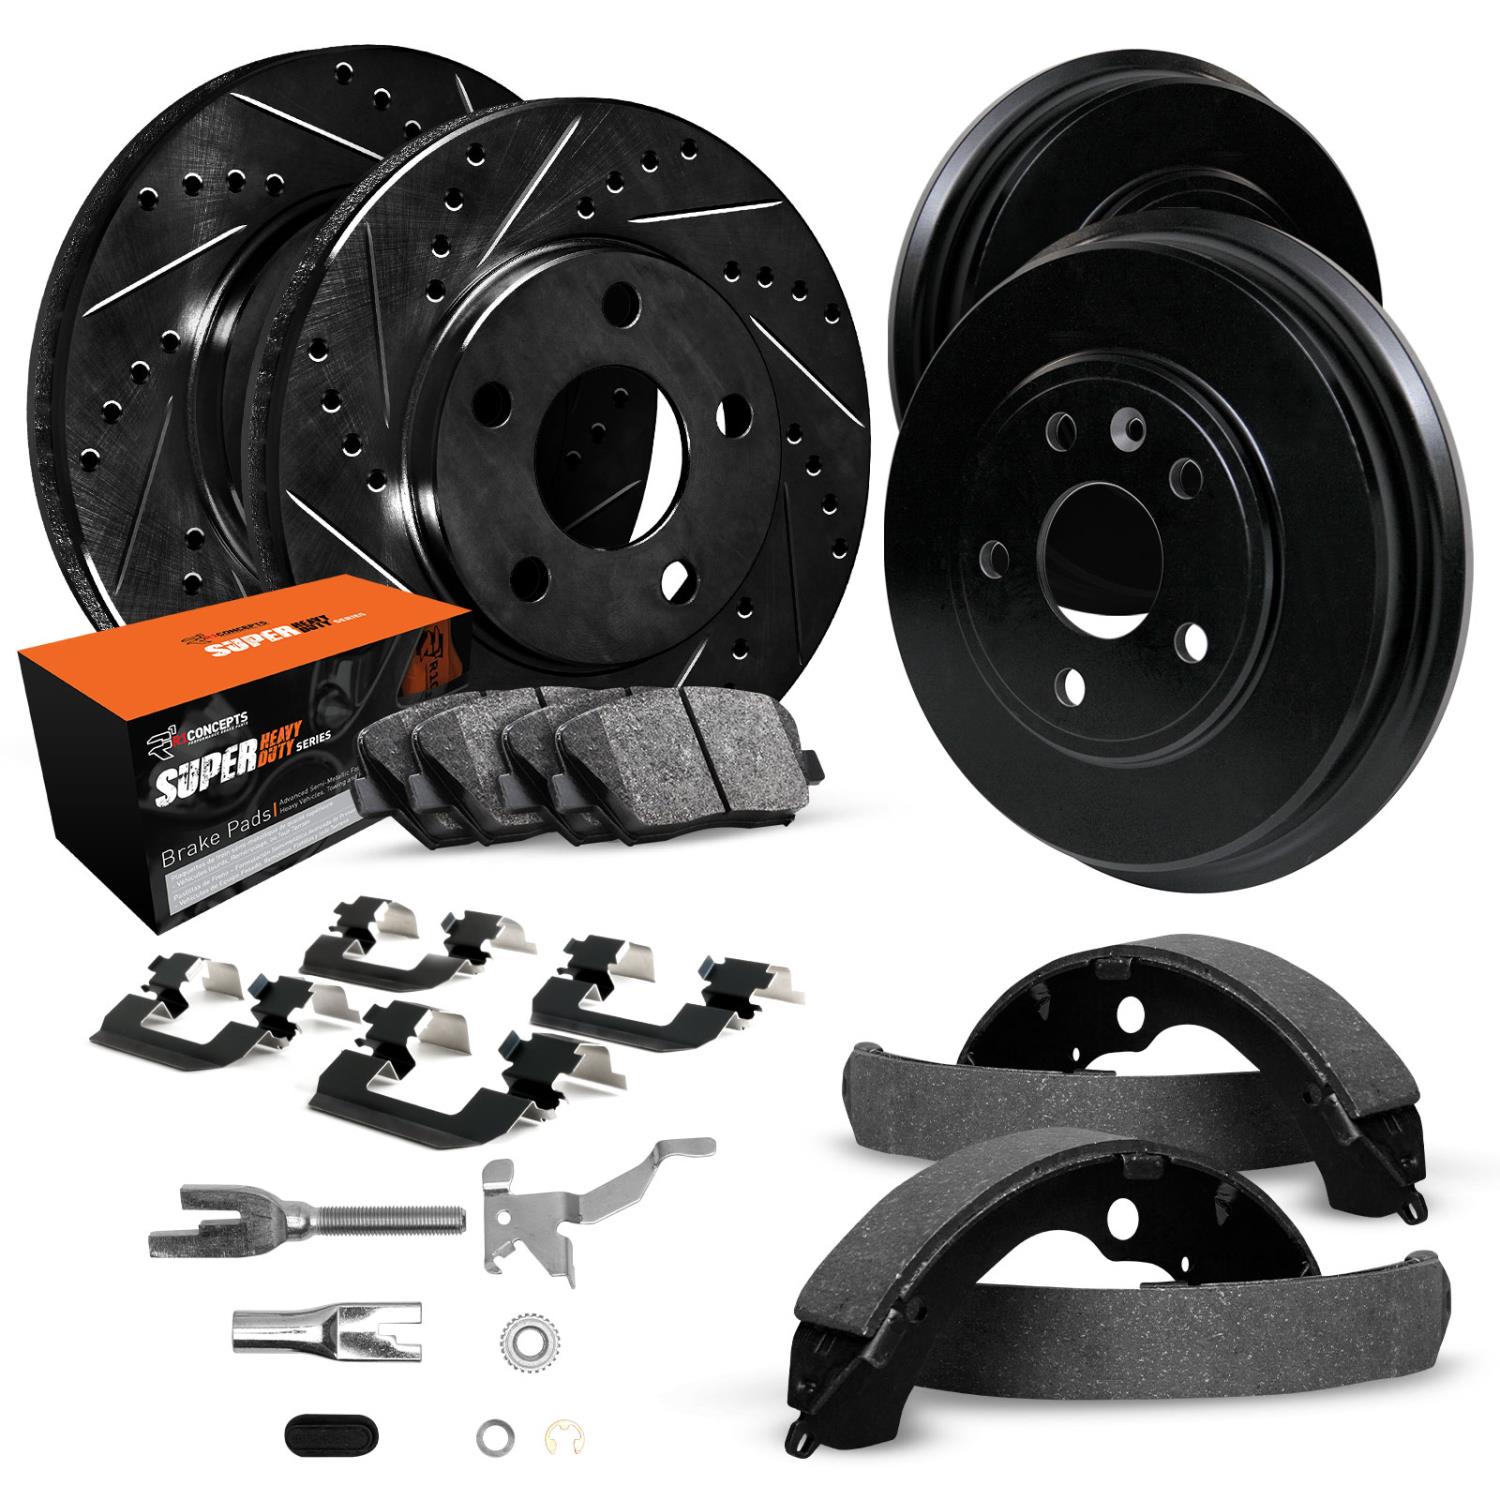 E-Line Drilled/Slotted Black Rotor & Drum Set w/Super-Duty Pads, Shoes, Hardware/Adjusters, 1976-1985 Ford/Lincoln/Mercury/Mazda